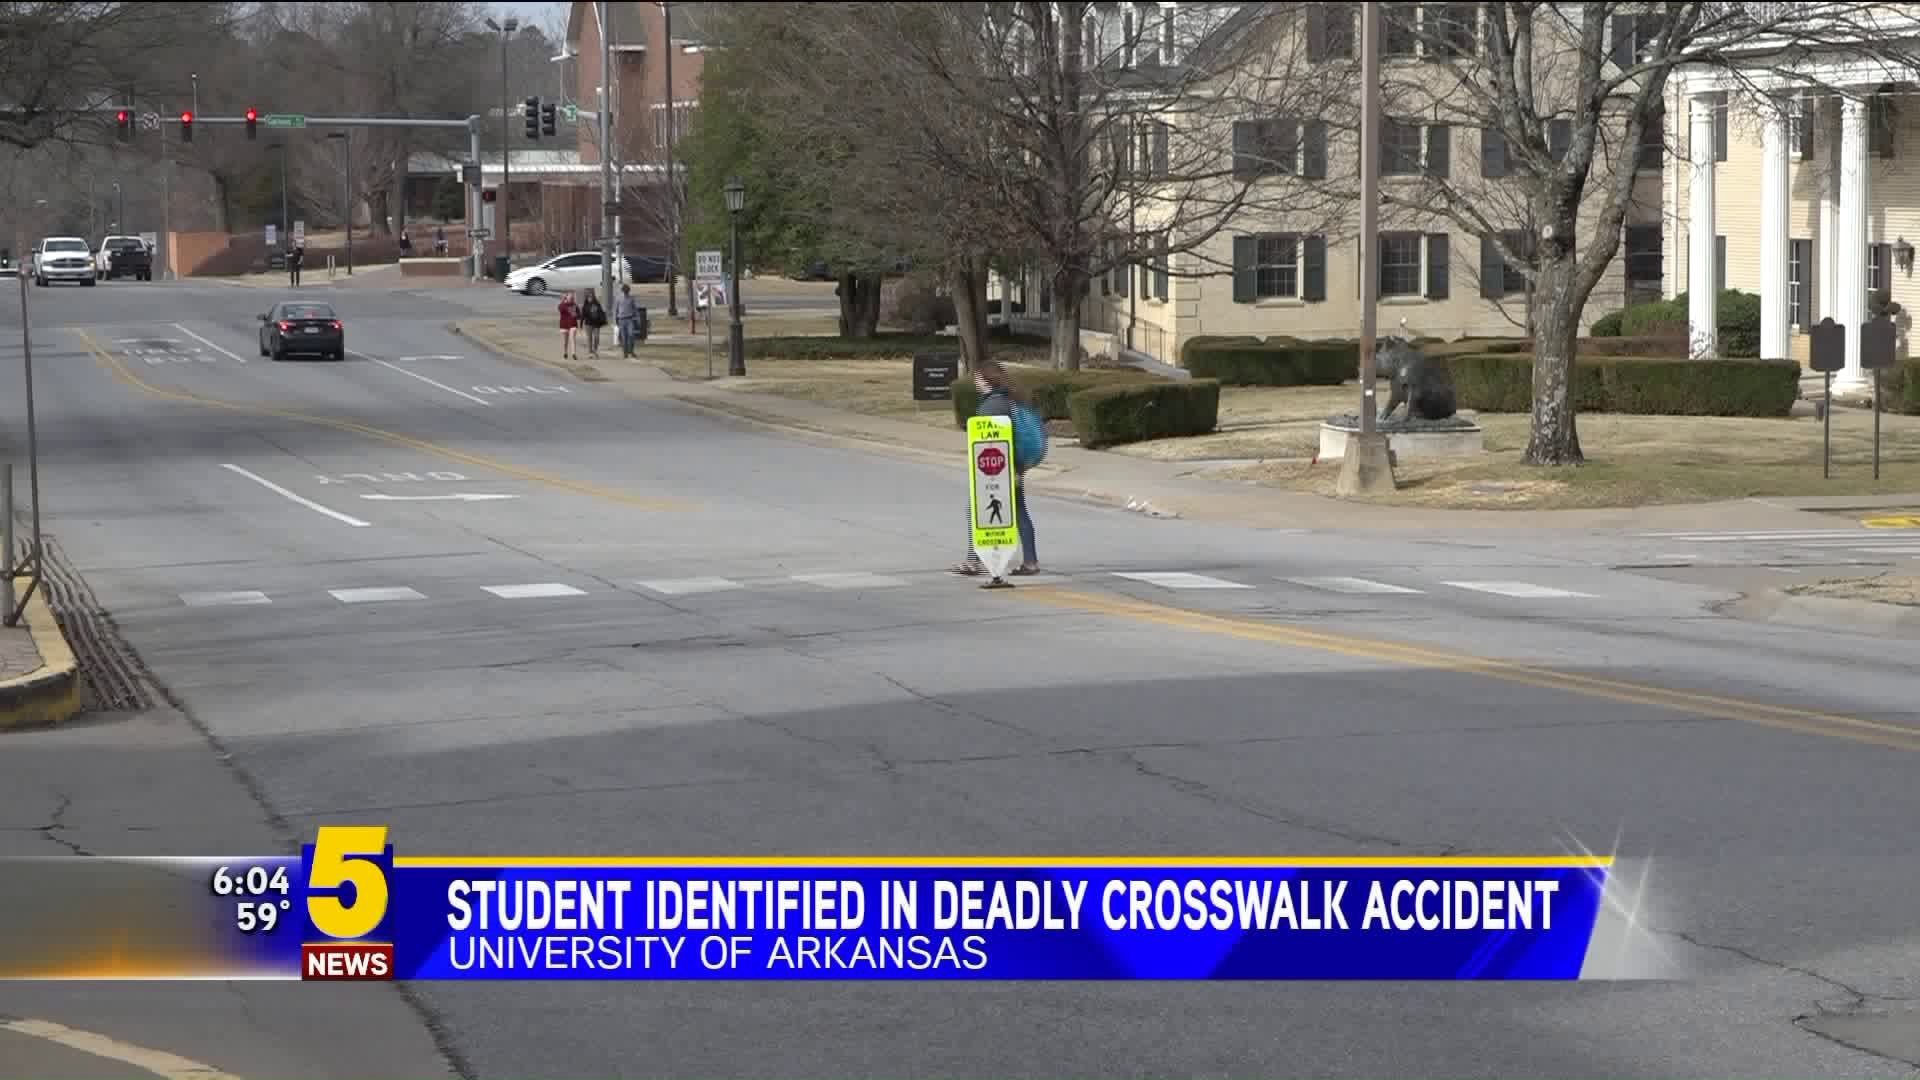 U of A Student Identified In Deadly Crosswalk Accident